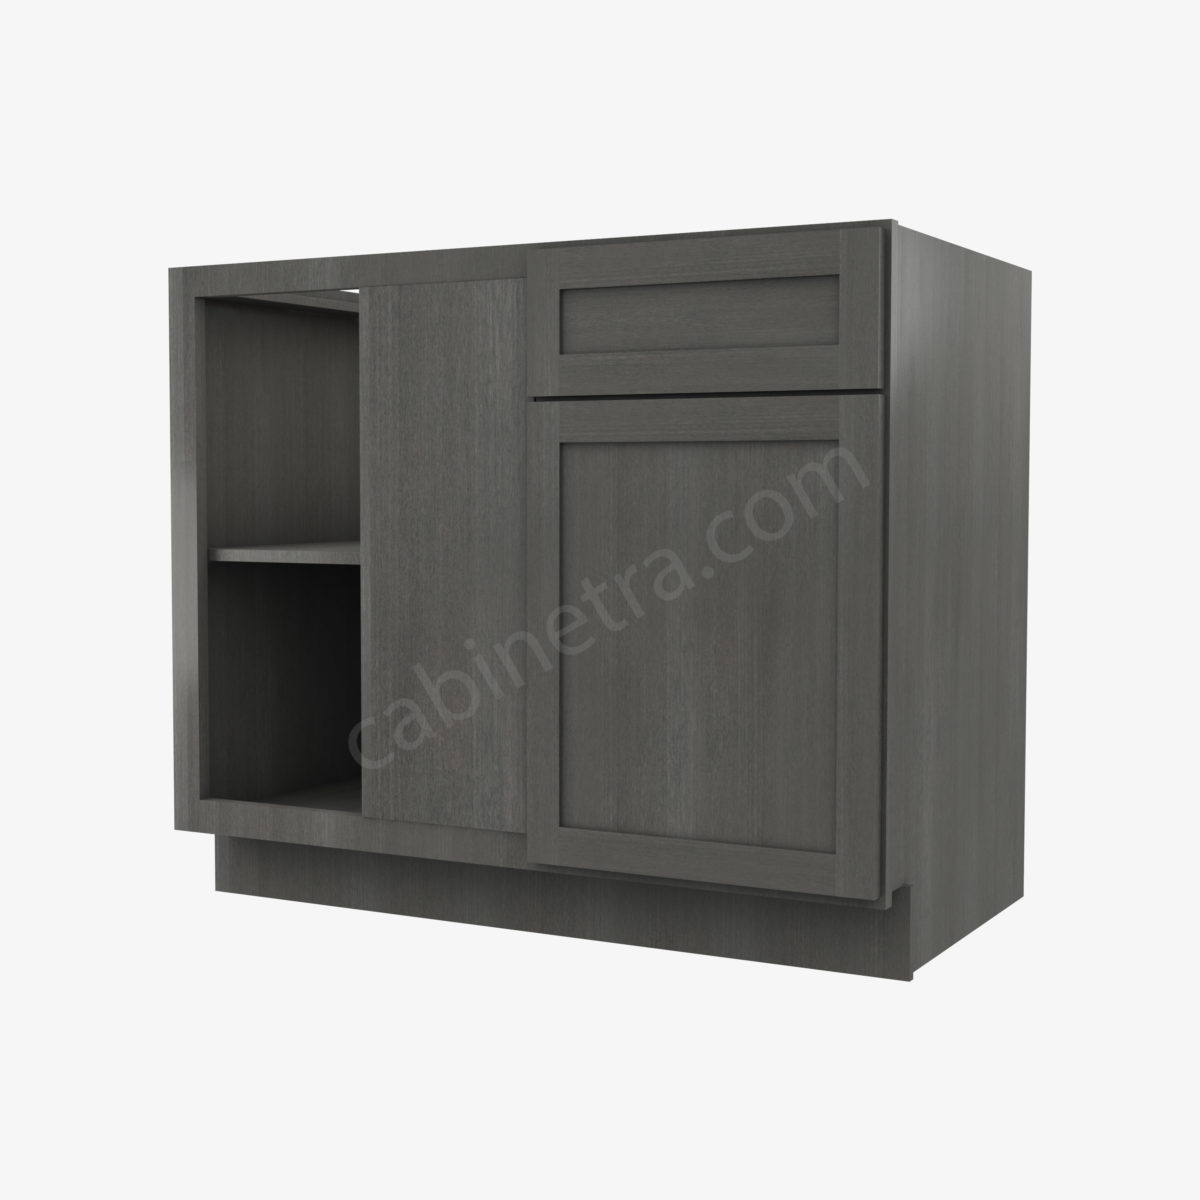 AG BBLC42 45 39W 0 Forevermark Greystone Shaker Cabinetra scaled